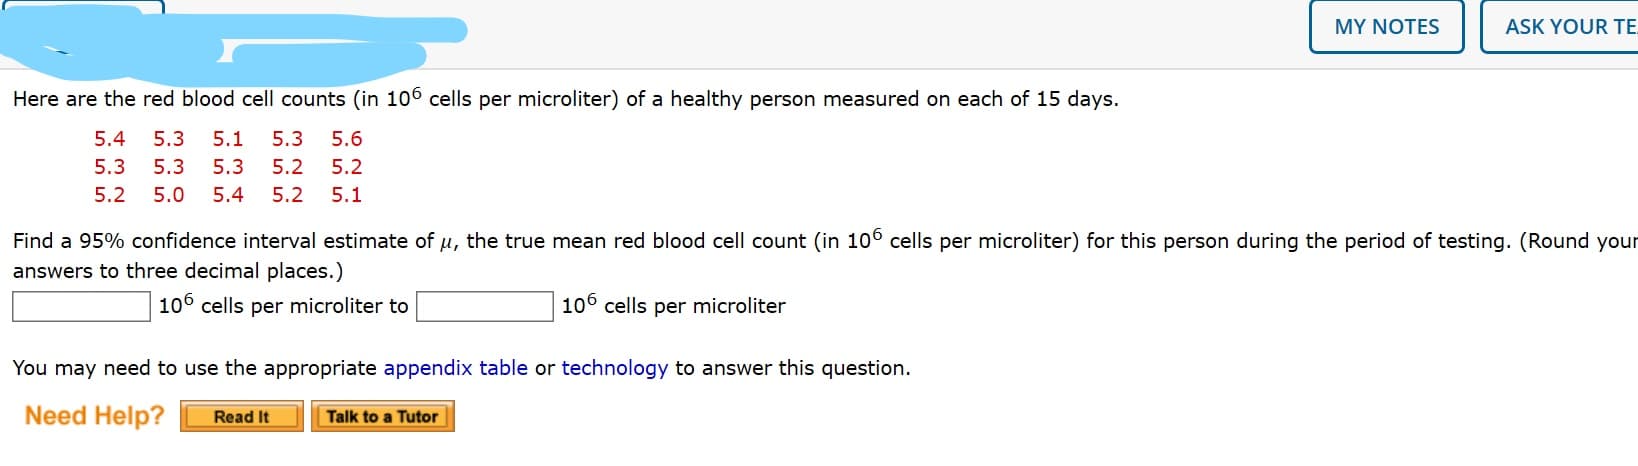 MY NOTES
ASK YOUR TE
Here are the red blood cell counts (in 106 cells per microliter) of a healthy person measured on each of 15 days.
5.4
5.3
5.1
5.3
5.6
5.3
5.3
5.3
5.2
5.2
5.2
5.0
5.4
5.2
5.1
Find a 95% confidence interval estimate of u, the true mean red blood cell count (in 10° cells per microliter) for this person during the period of testing. (Round your
answers to three decimal places.)
106 cells per microliter to
106 cells per microliter
You may need to use the appropriate appendix table or technology to answer this question.
Need Help?
Read It
Talk to a Tutor
